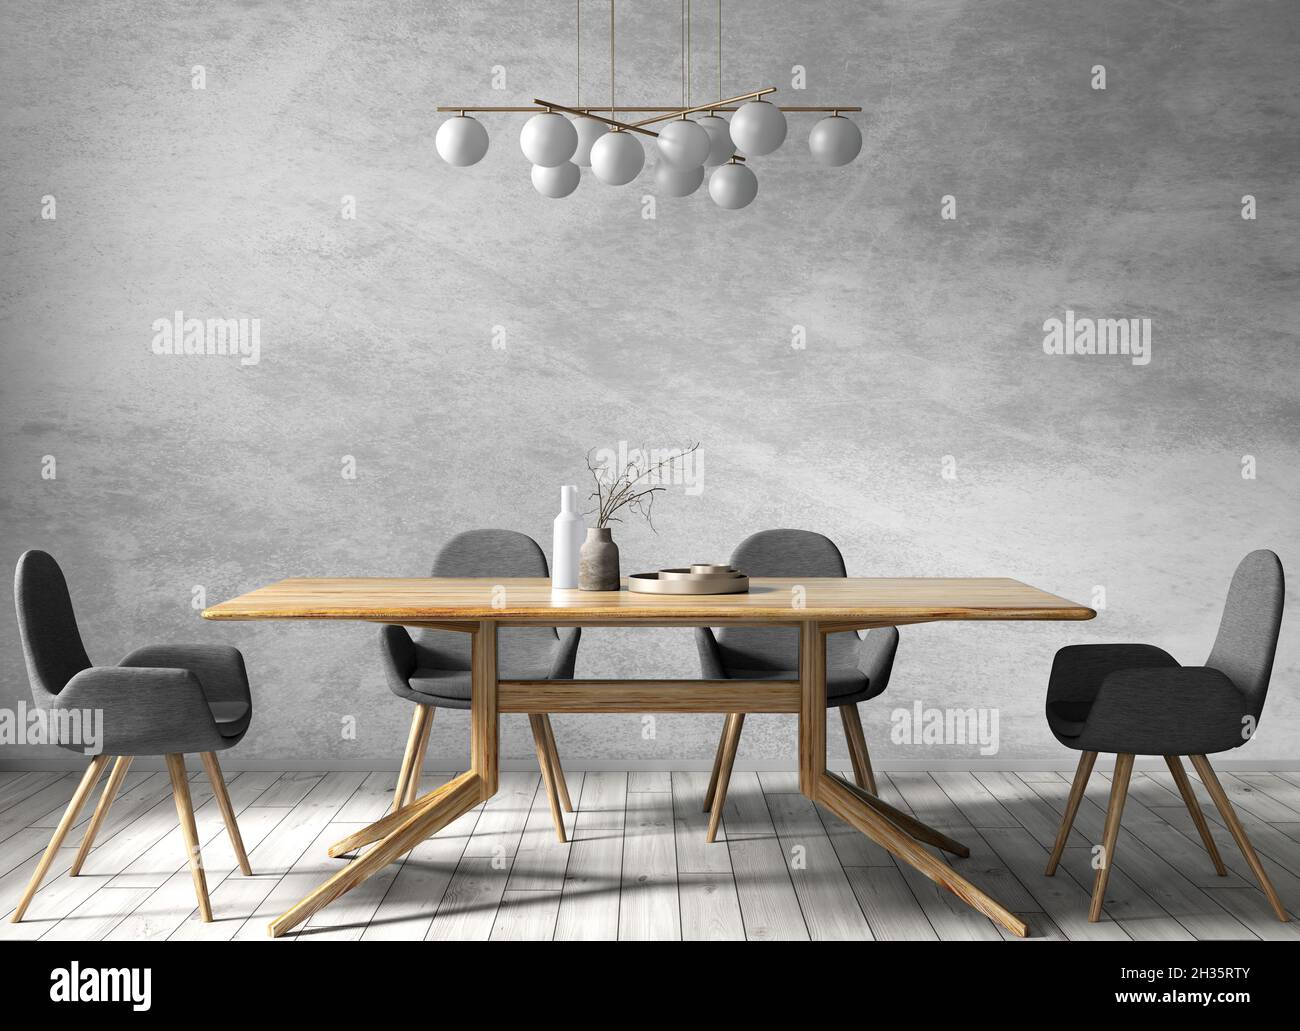 Interior design of modern dining room, wooden table and black chairs against gray stucco wall 3d rendering Stock Photo